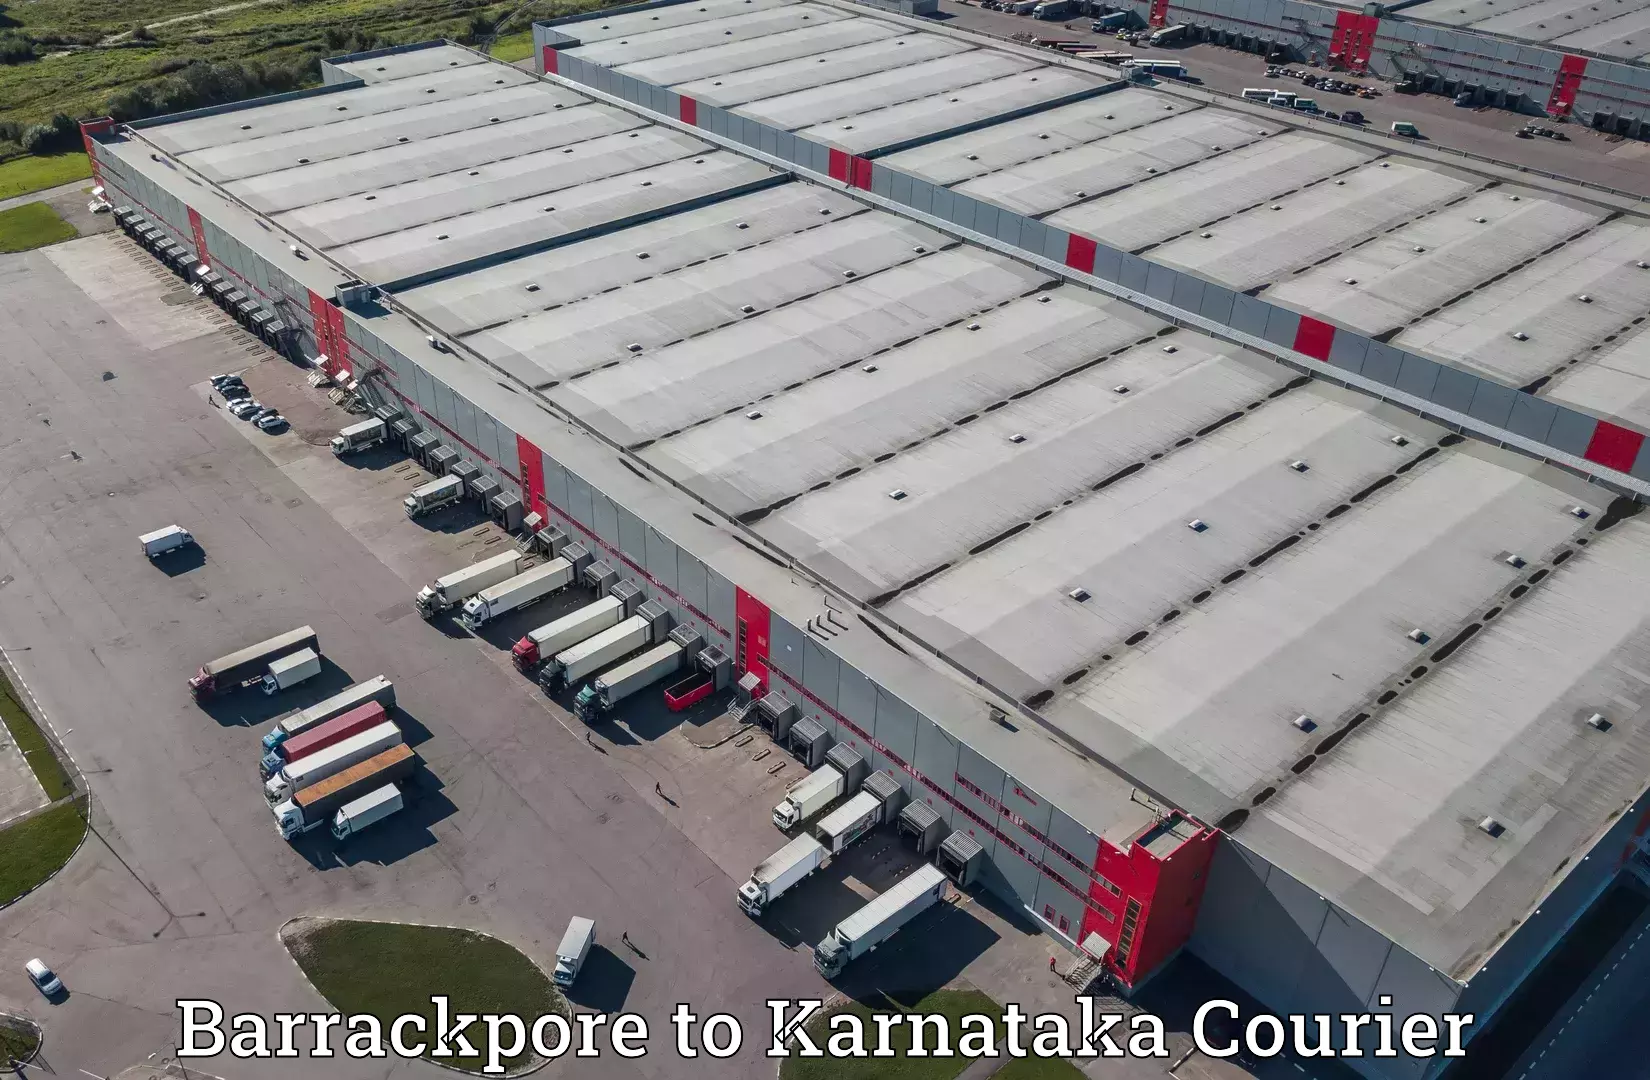 State-of-the-art courier technology Barrackpore to Kulshekar